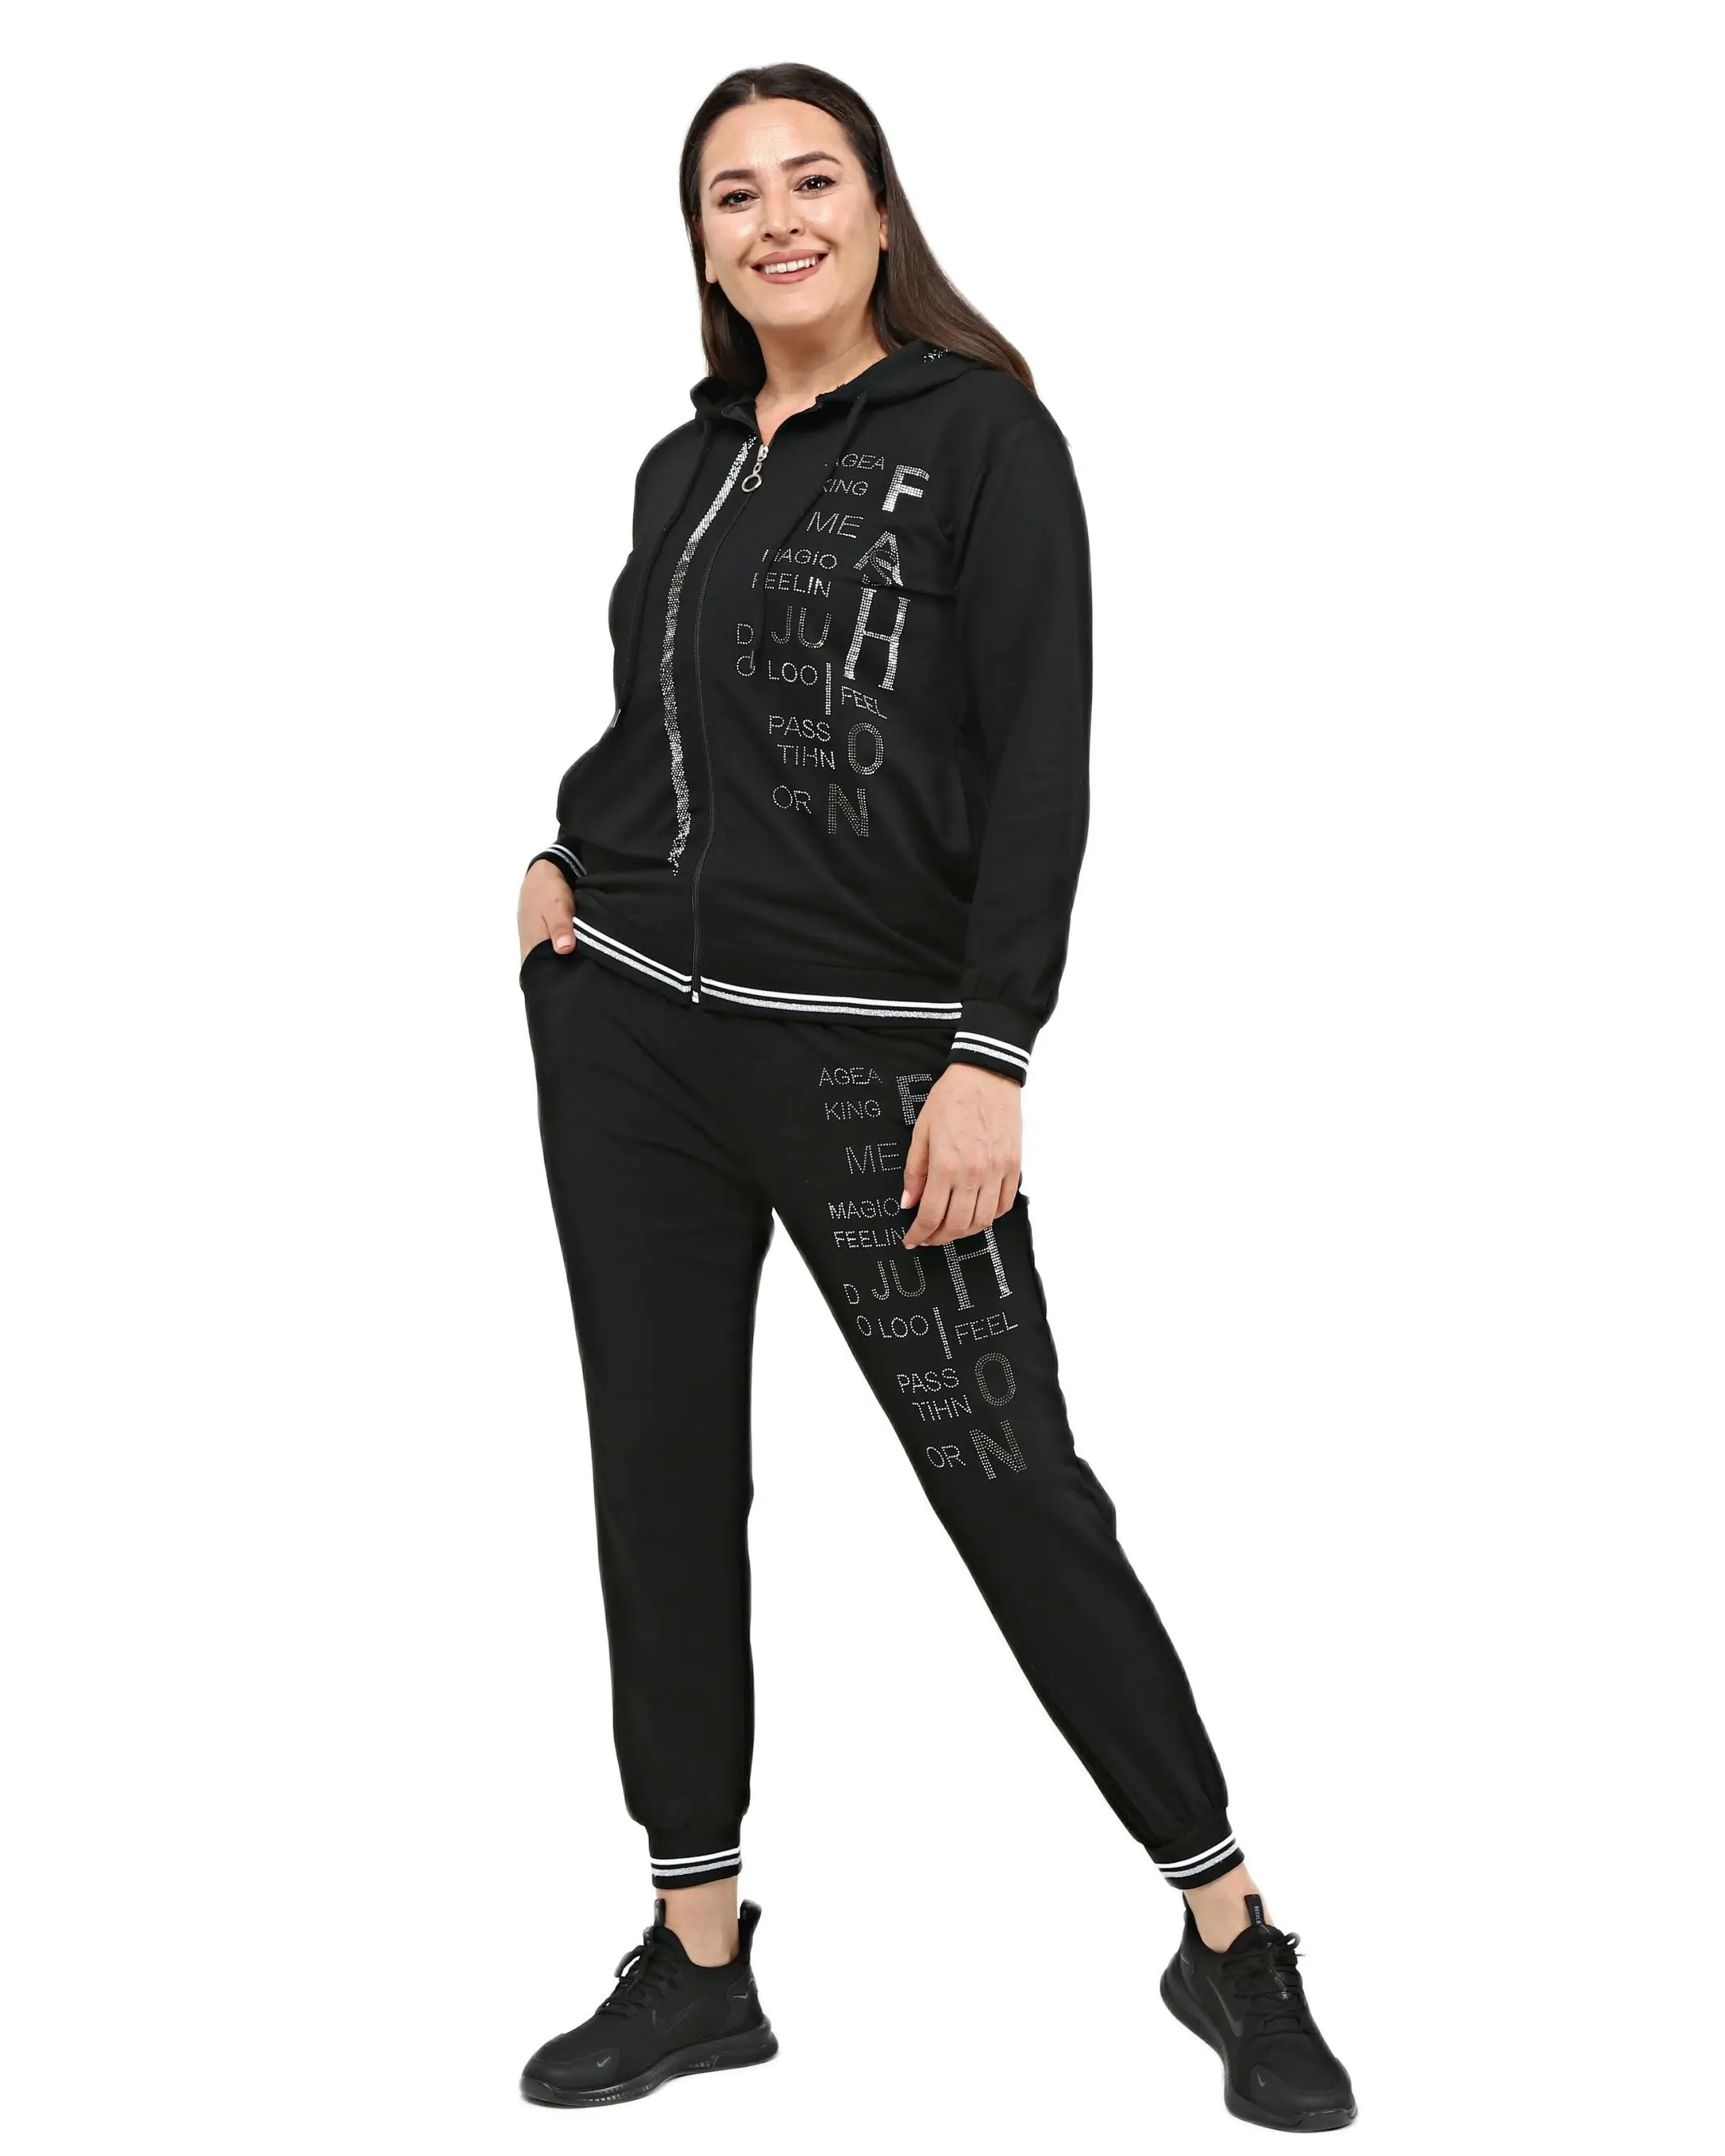 Women’s Plus Size Black Sweatsuit Set 2 Piece Lettering Stone Print Tracksuit, Designed and Made in Turkey, New Arrival